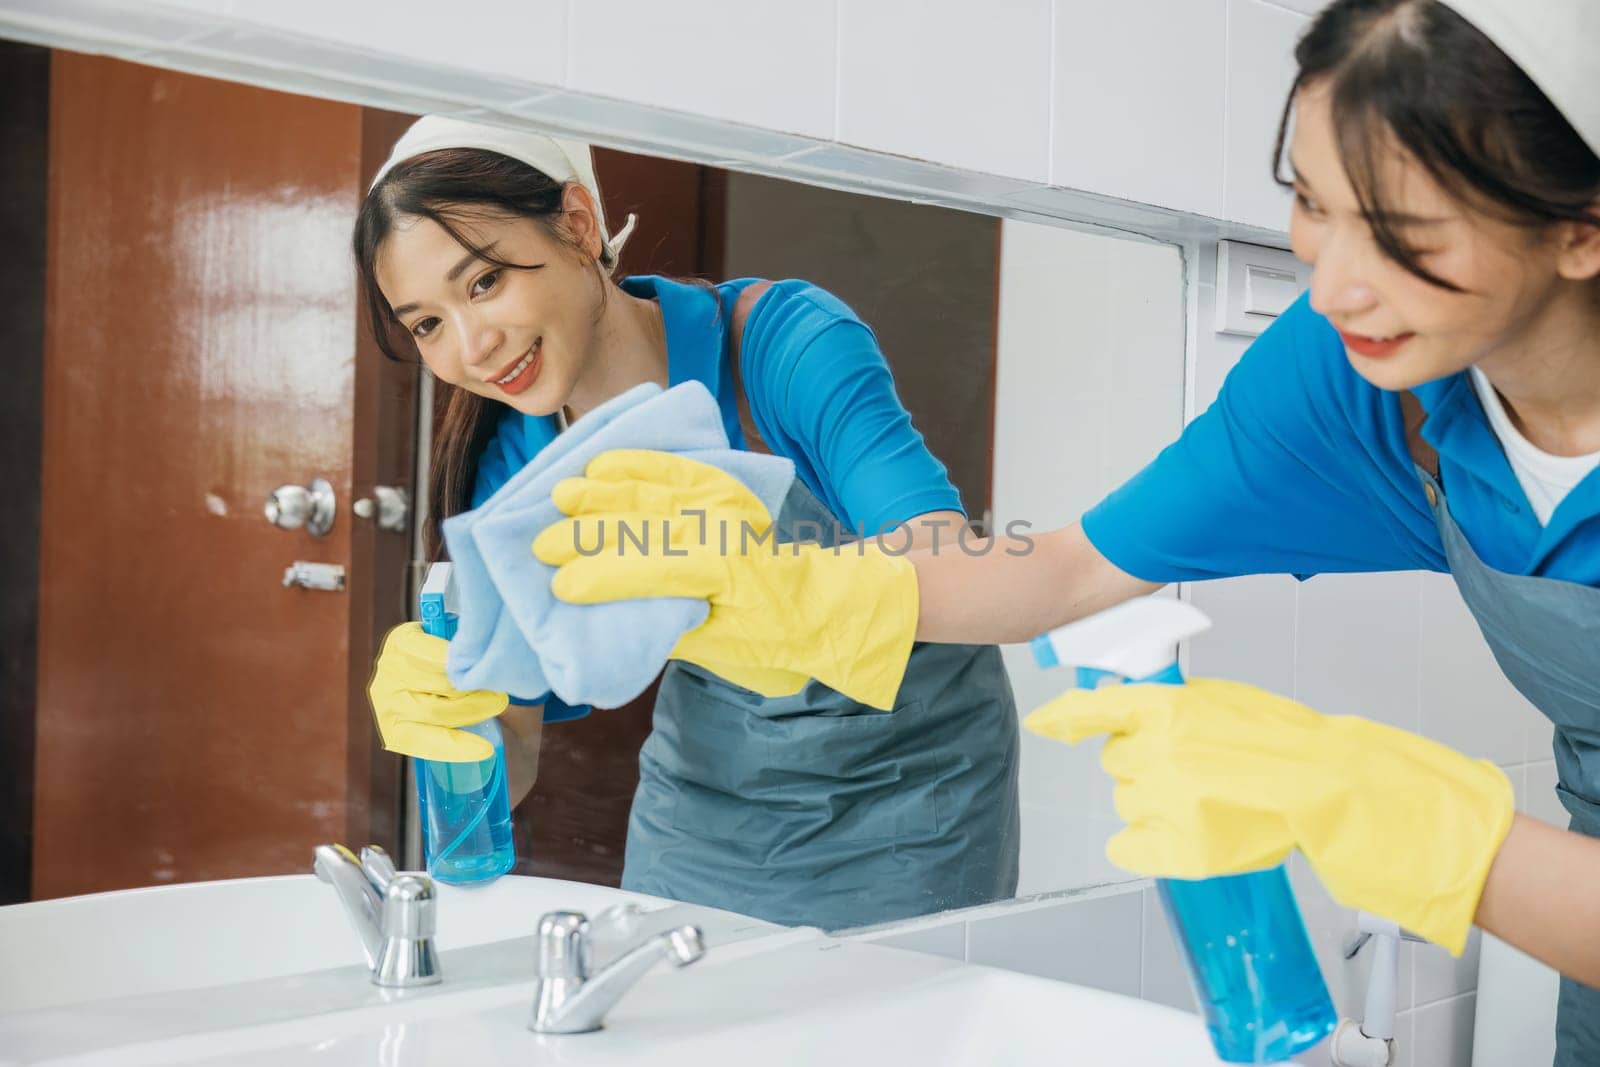 Maid with rubber gloves wipes bathroom mirror ensuring shiny reflection with a rag. Hotel service highlights professional cleaning ensuring purity and hygiene in modern settings. Maid cleaning at home by Sorapop